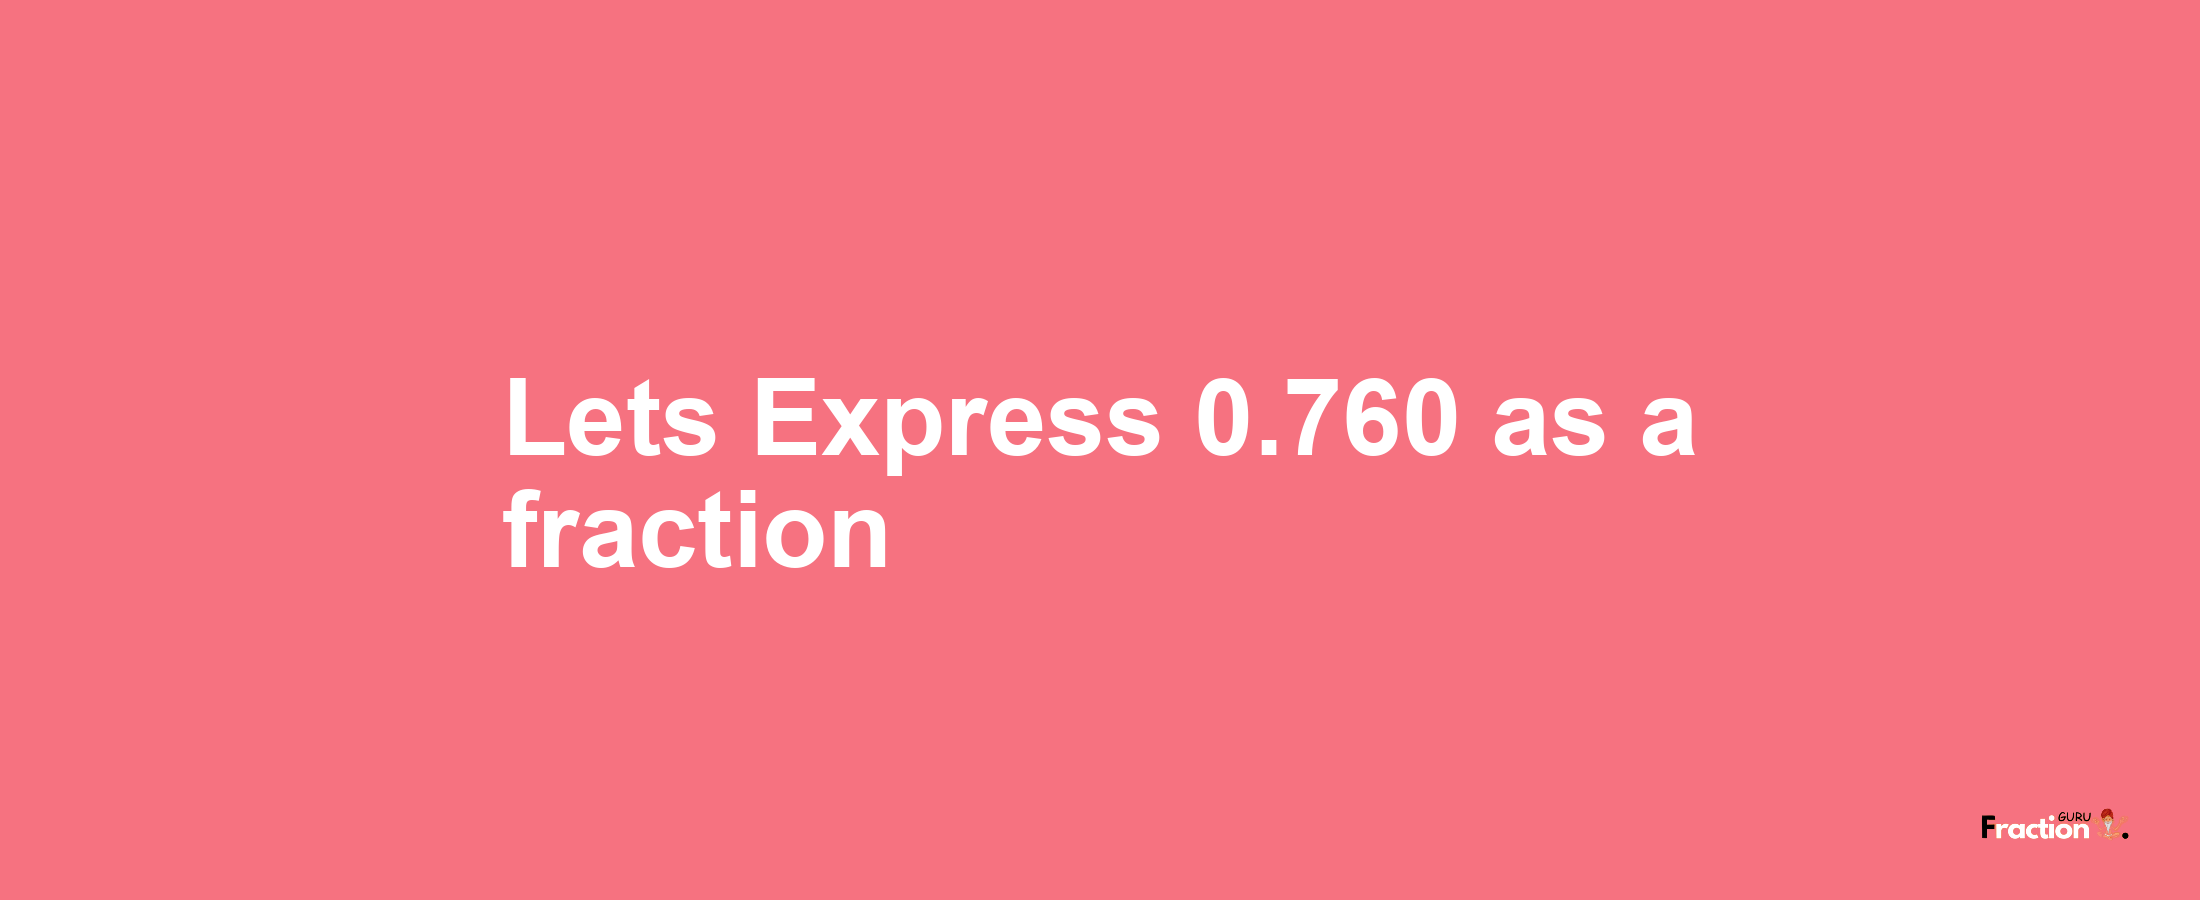 Lets Express 0.760 as afraction